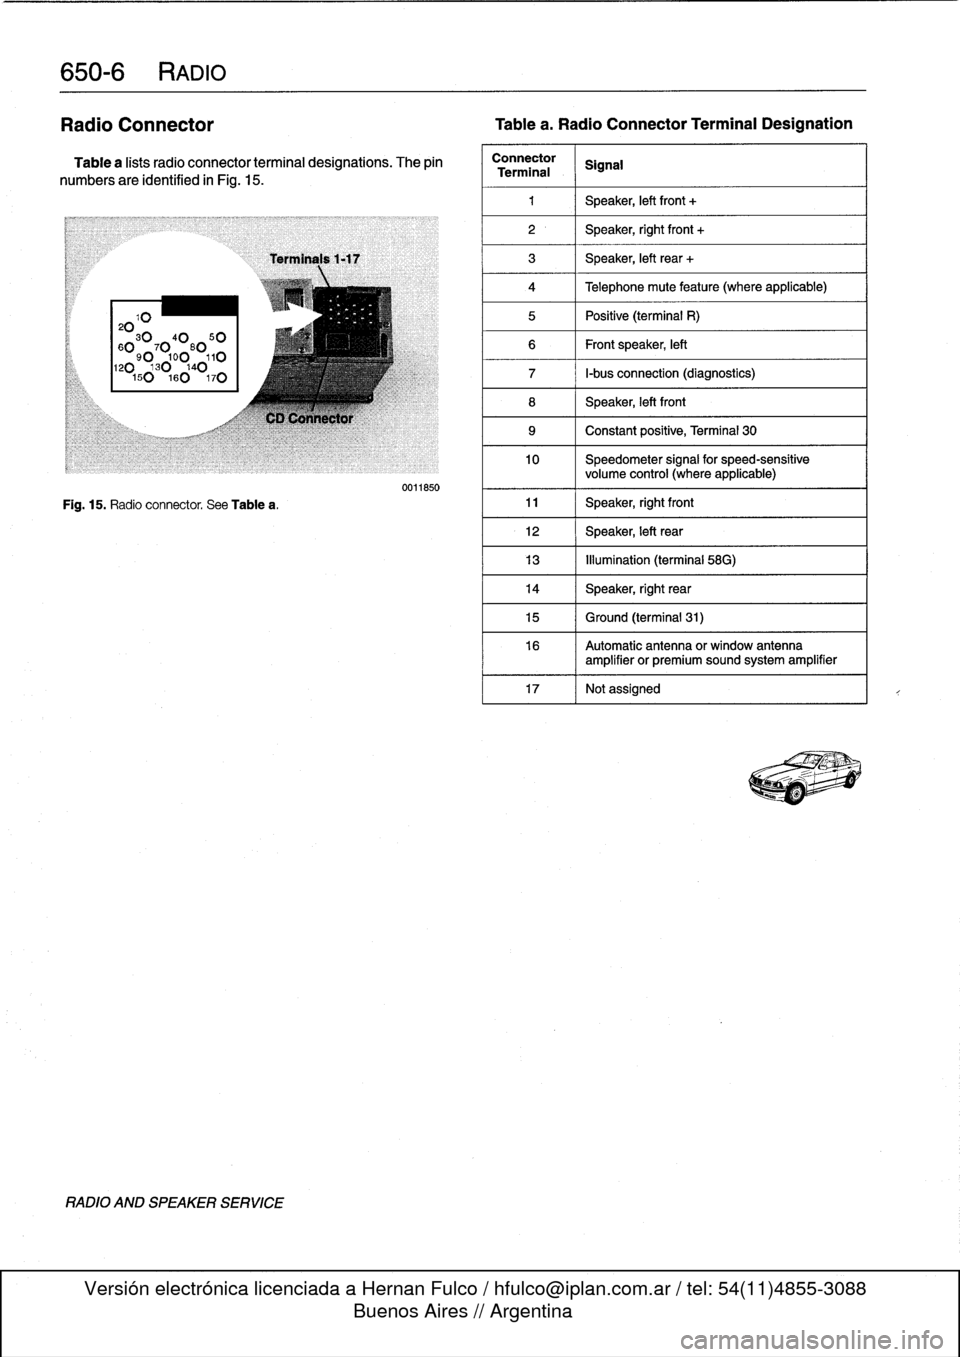 BMW 318i 1997 E36 Workshop Manual 
650-
6
RADIO

Radio
Connector

	

Tablea
.
Radio
Connector
Terminal
Designation

Table
a
lists
radio
connector
terminal
designations
.
The
pin

numbers
are
identified
in
Fig
.
15
.

20103040
50

60
9